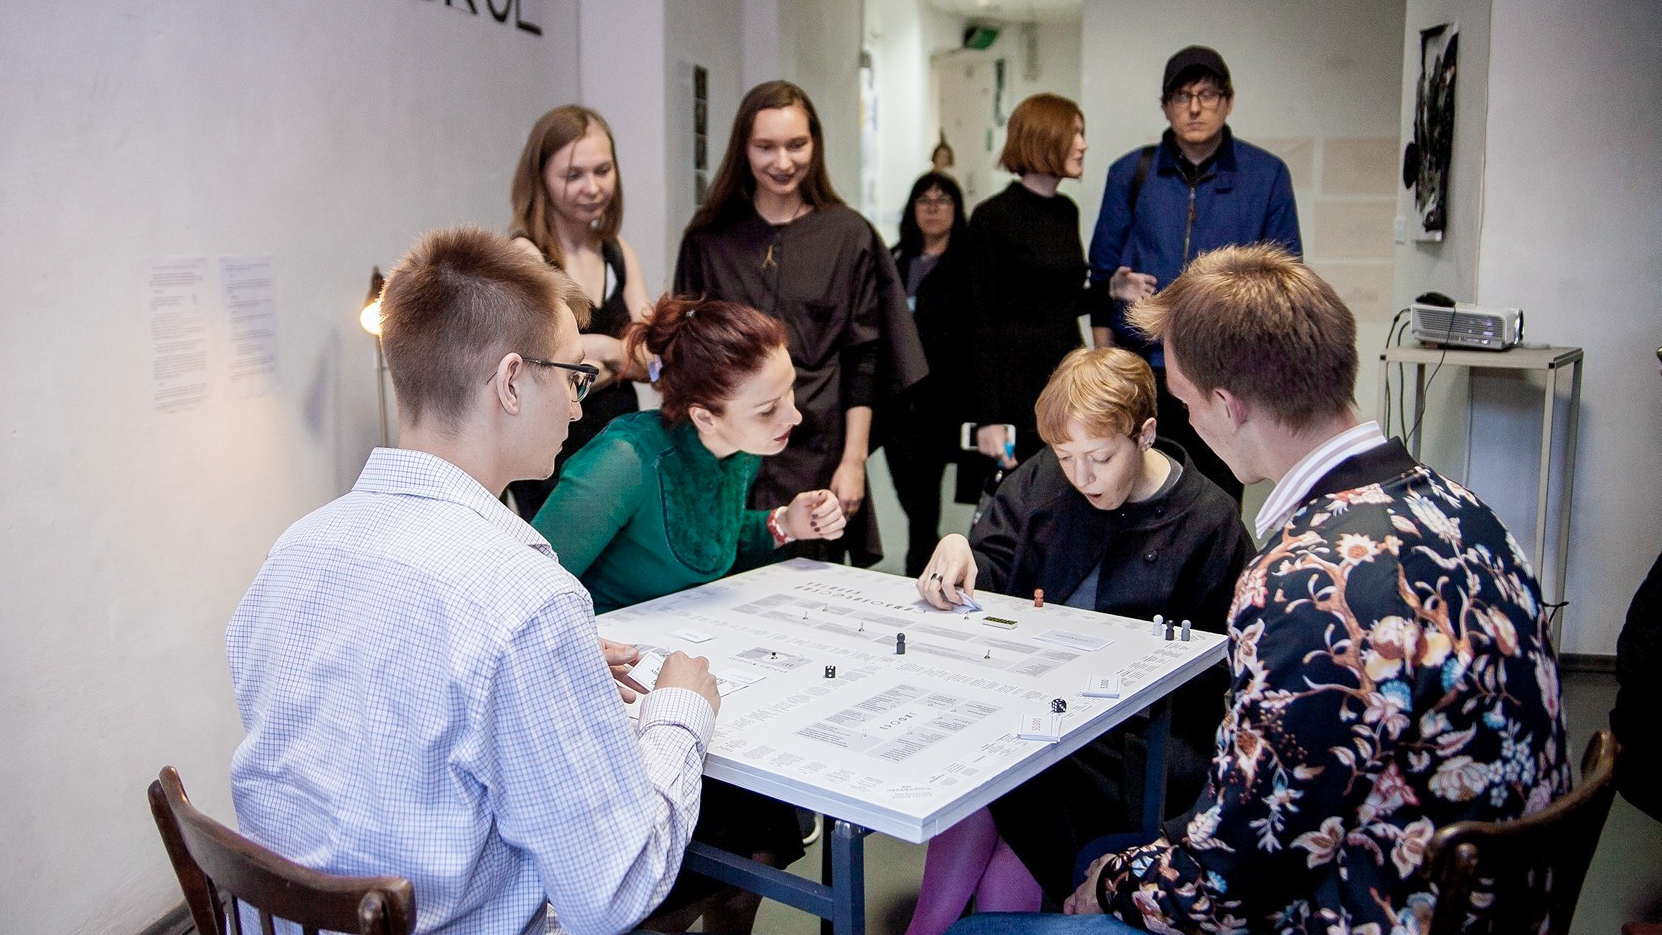 Symbolic Capital, 2018. This game allowed the participants to take a critical look at the connection between an artist and a foundation